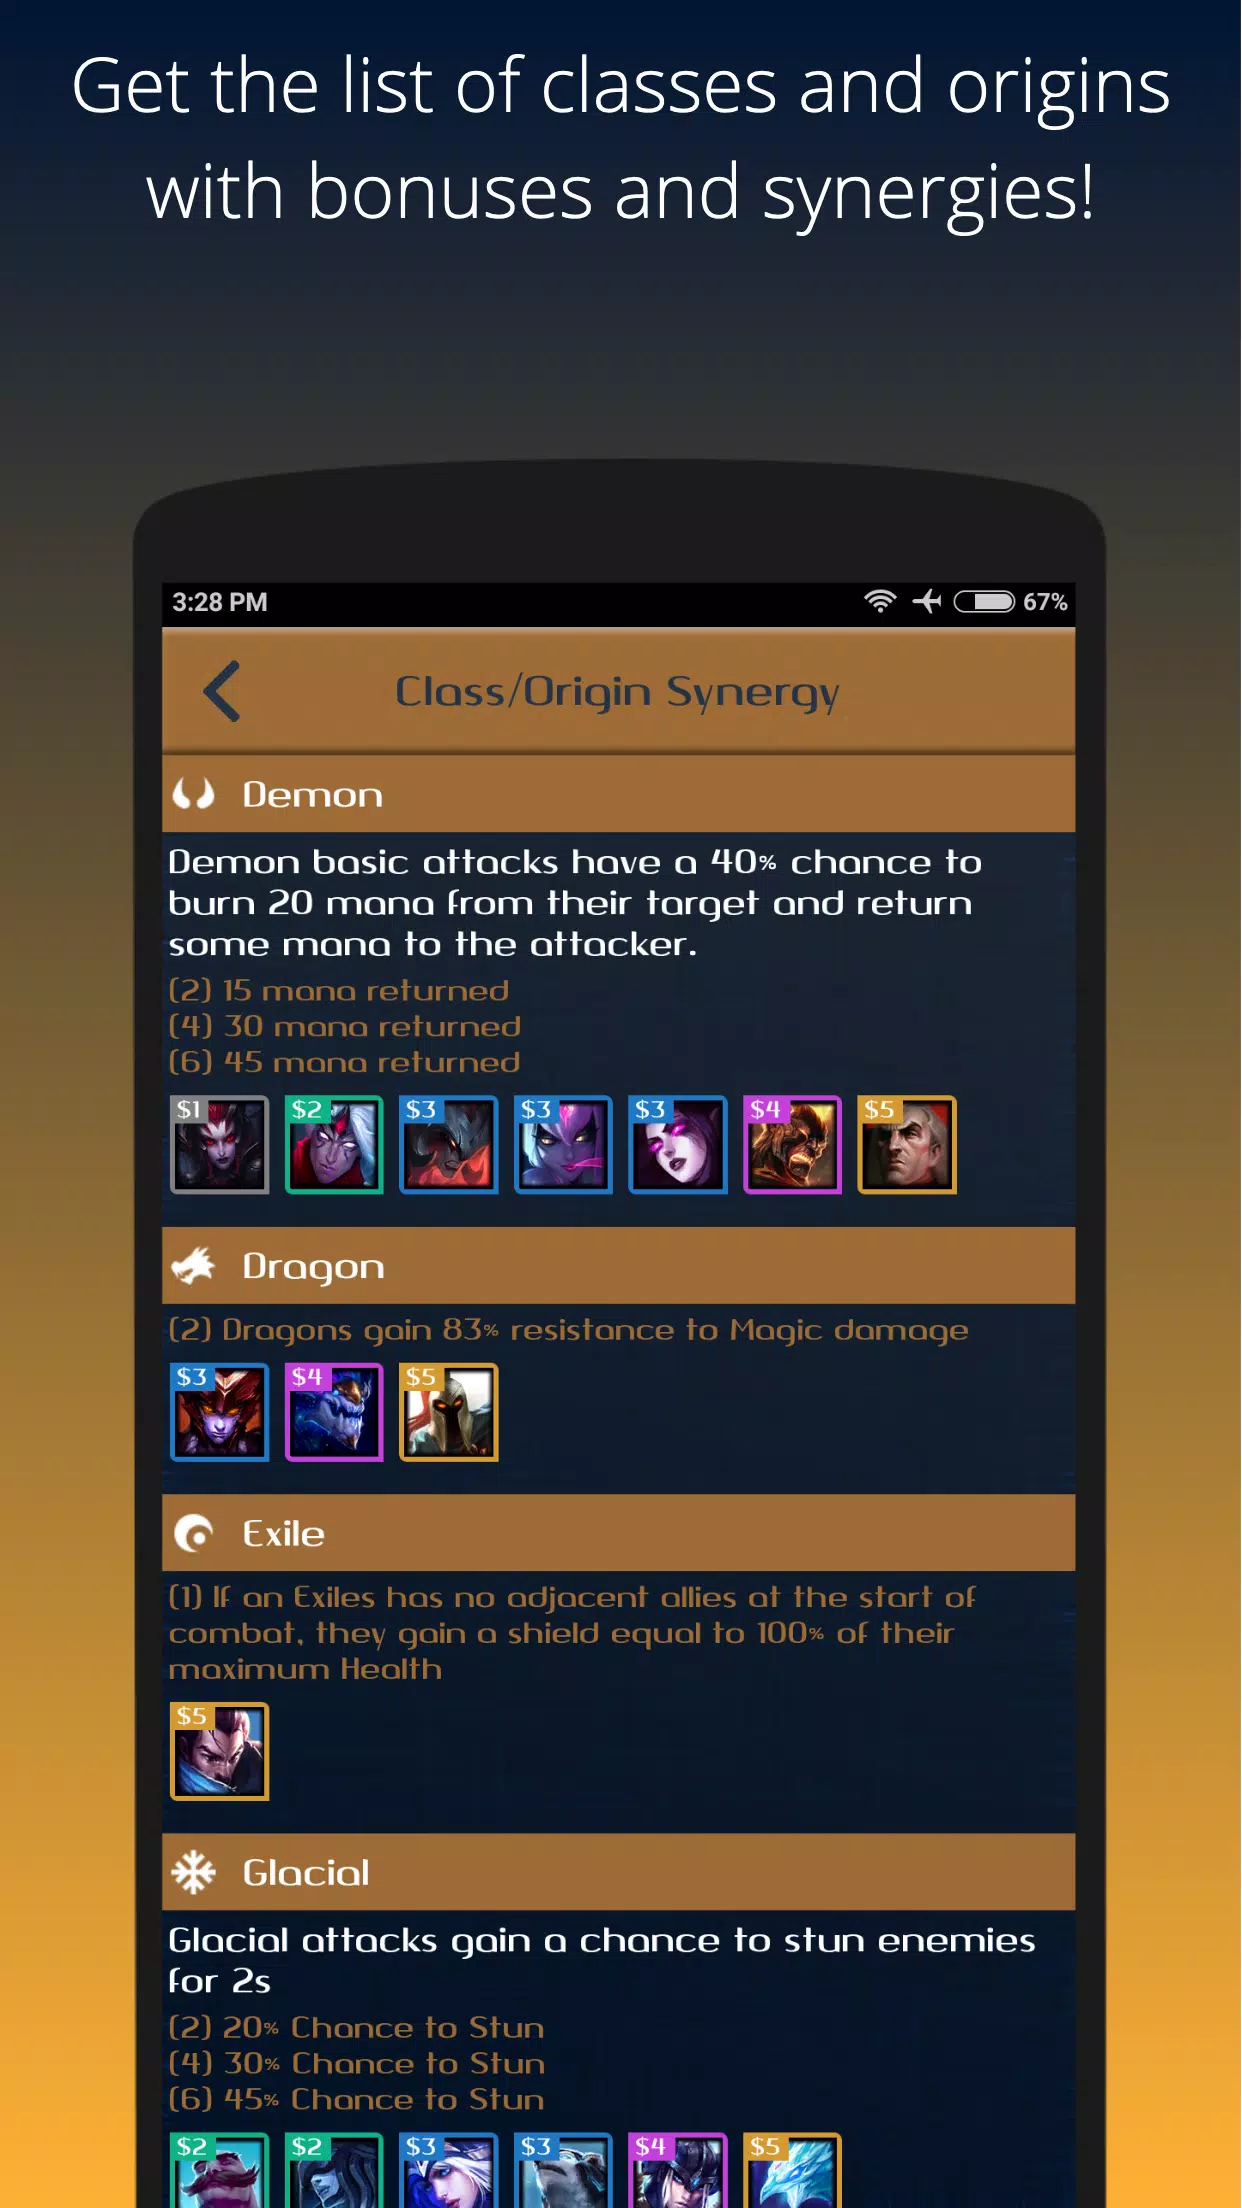 Android İndirme için Builds for TFT LoLChess Guide APK